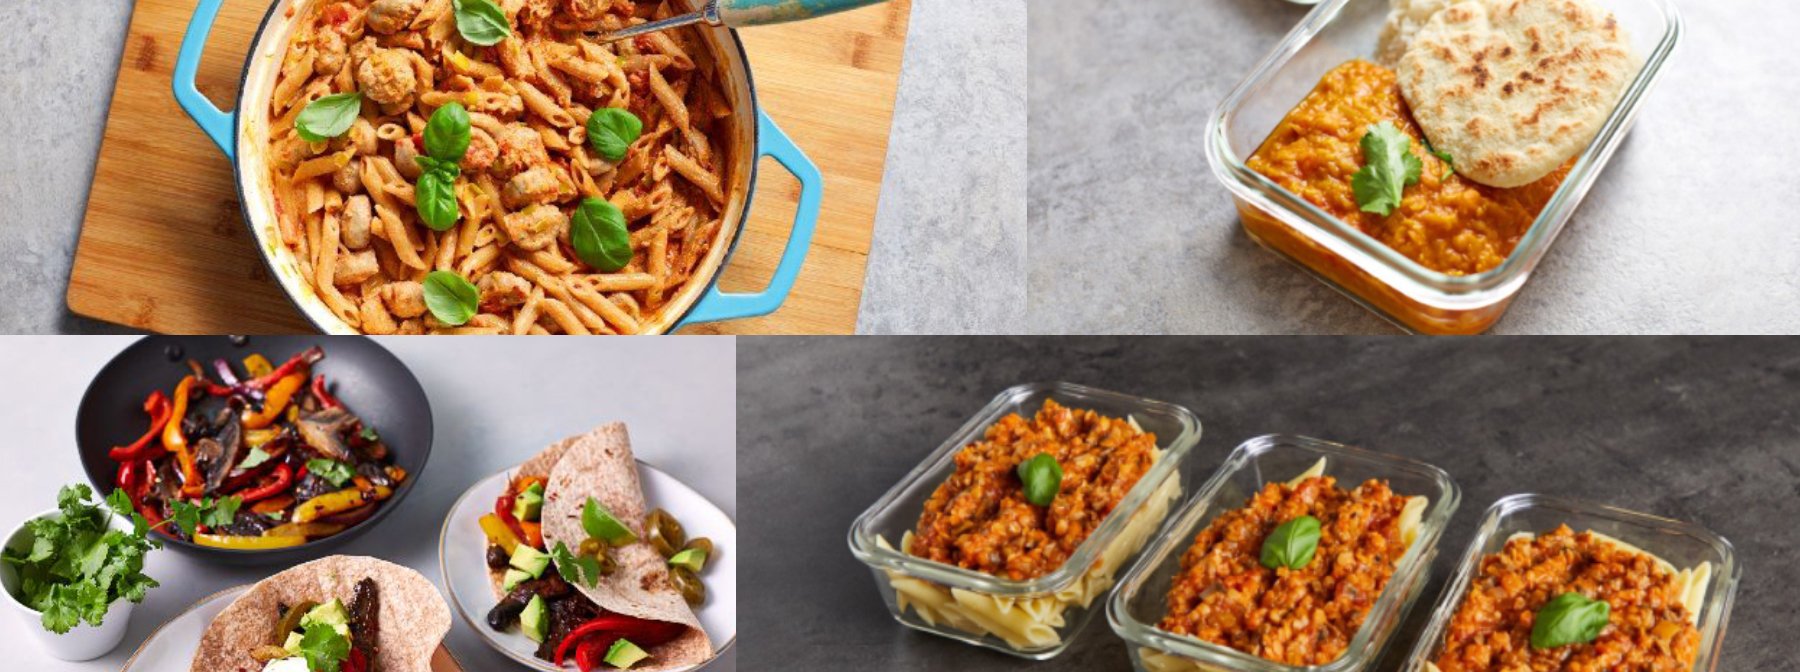 Budget Recipes From 45p | Wallet & Macro Friendly